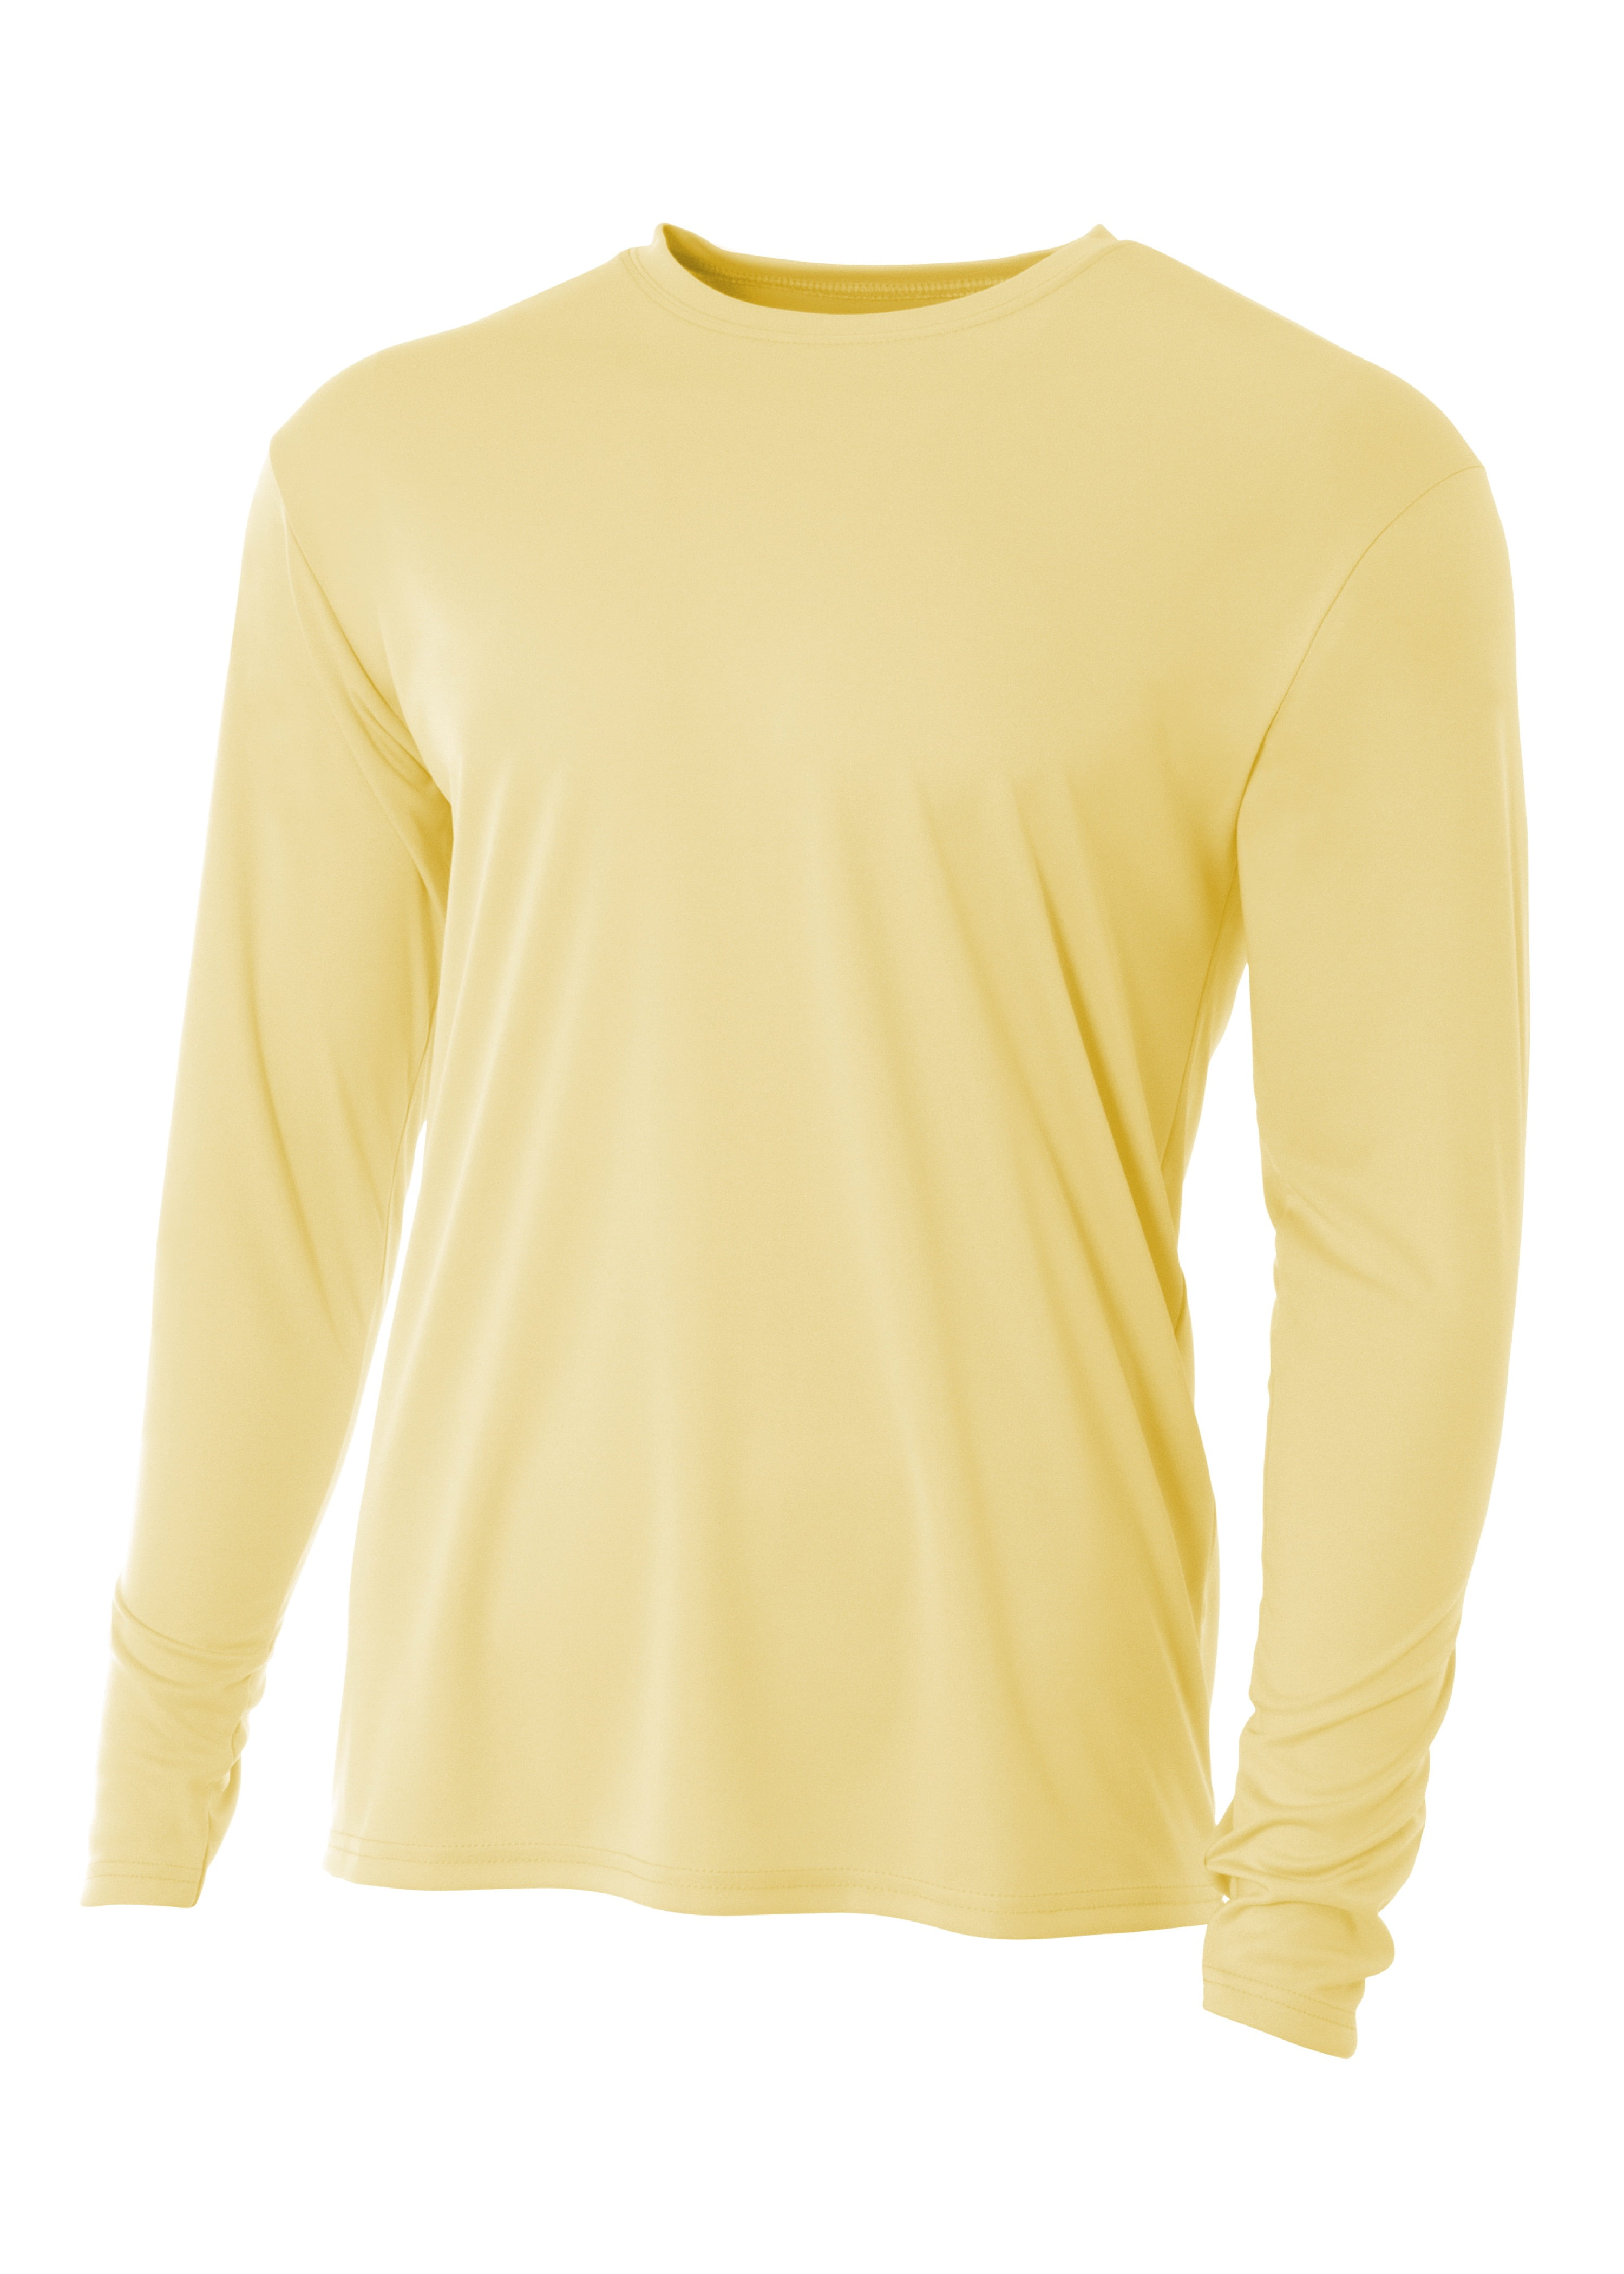 Just Blanks A4 N3165 Long Sleeve Cooling Performance Crew Shirt ...